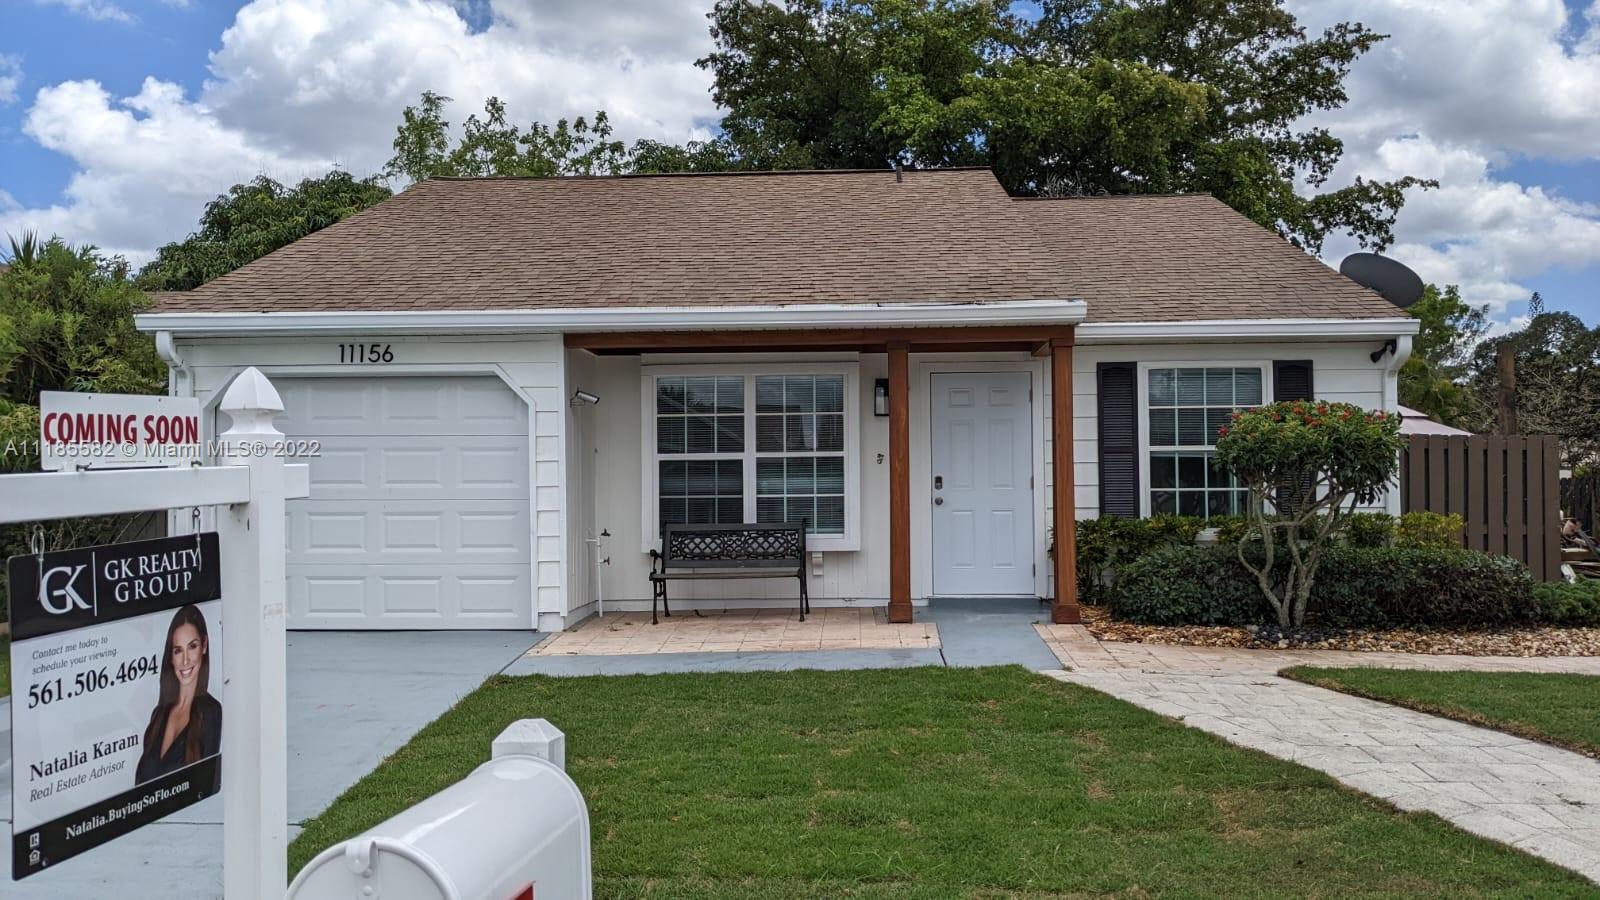 Newly remodeled 3 bed 2 bath with bonus room, Stainless steel appliances, with an oversized yard, co